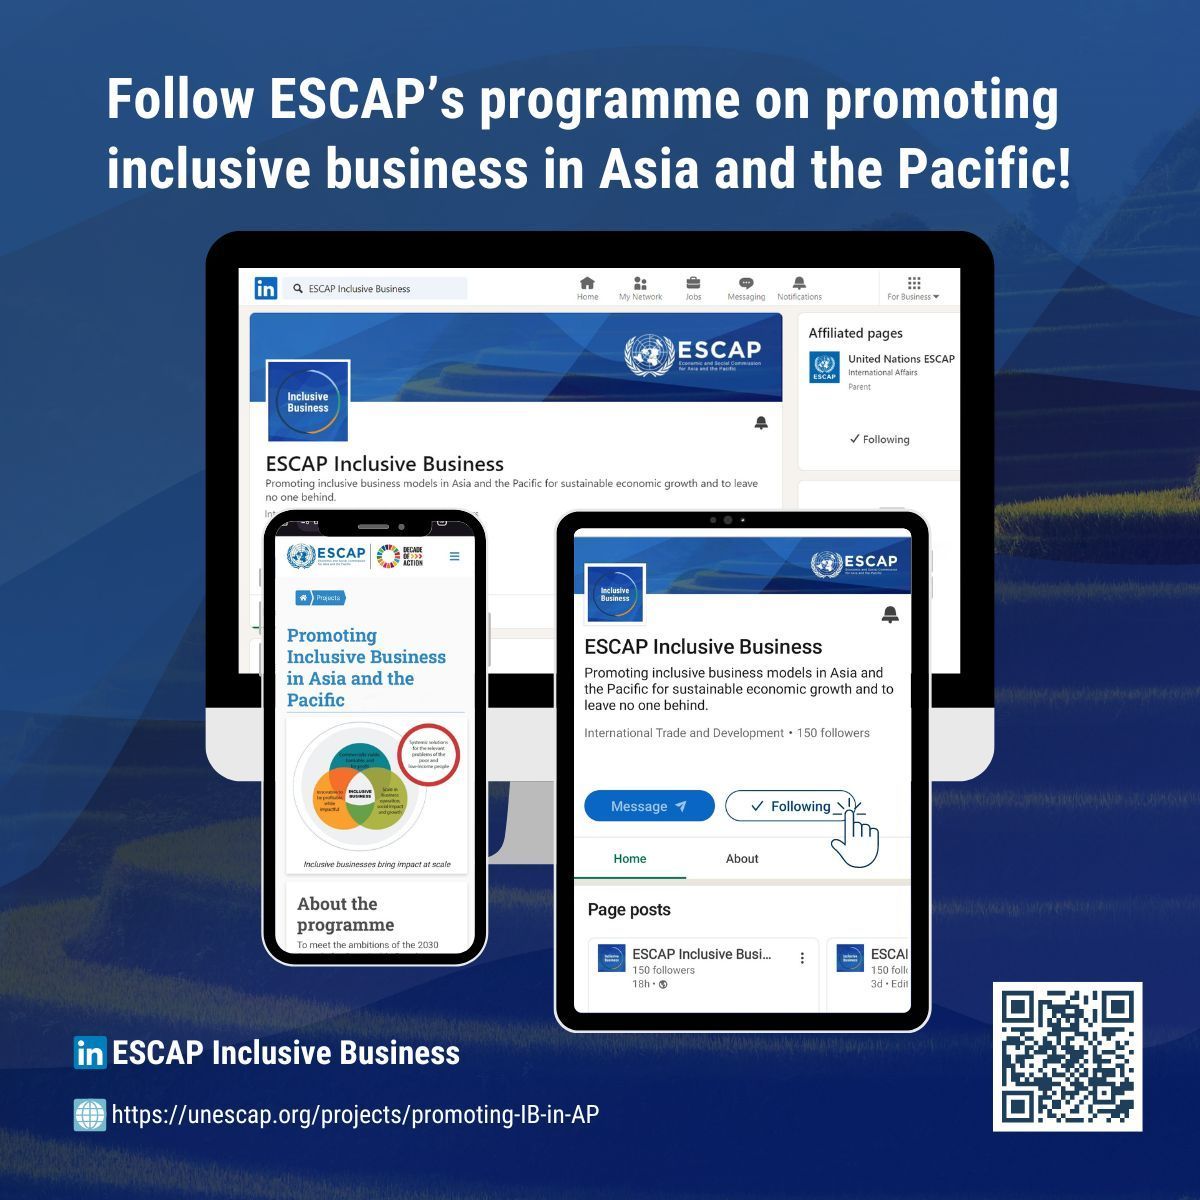 🌱 @UNESCAP promotes inclusive business models in #AsiaPacific for sustainable economic growth and to leave no one behind. 

Follow our new LinkedIn page to learn more about #InclusiveBusiness & receive regular updates: buff.ly/4am1hsy